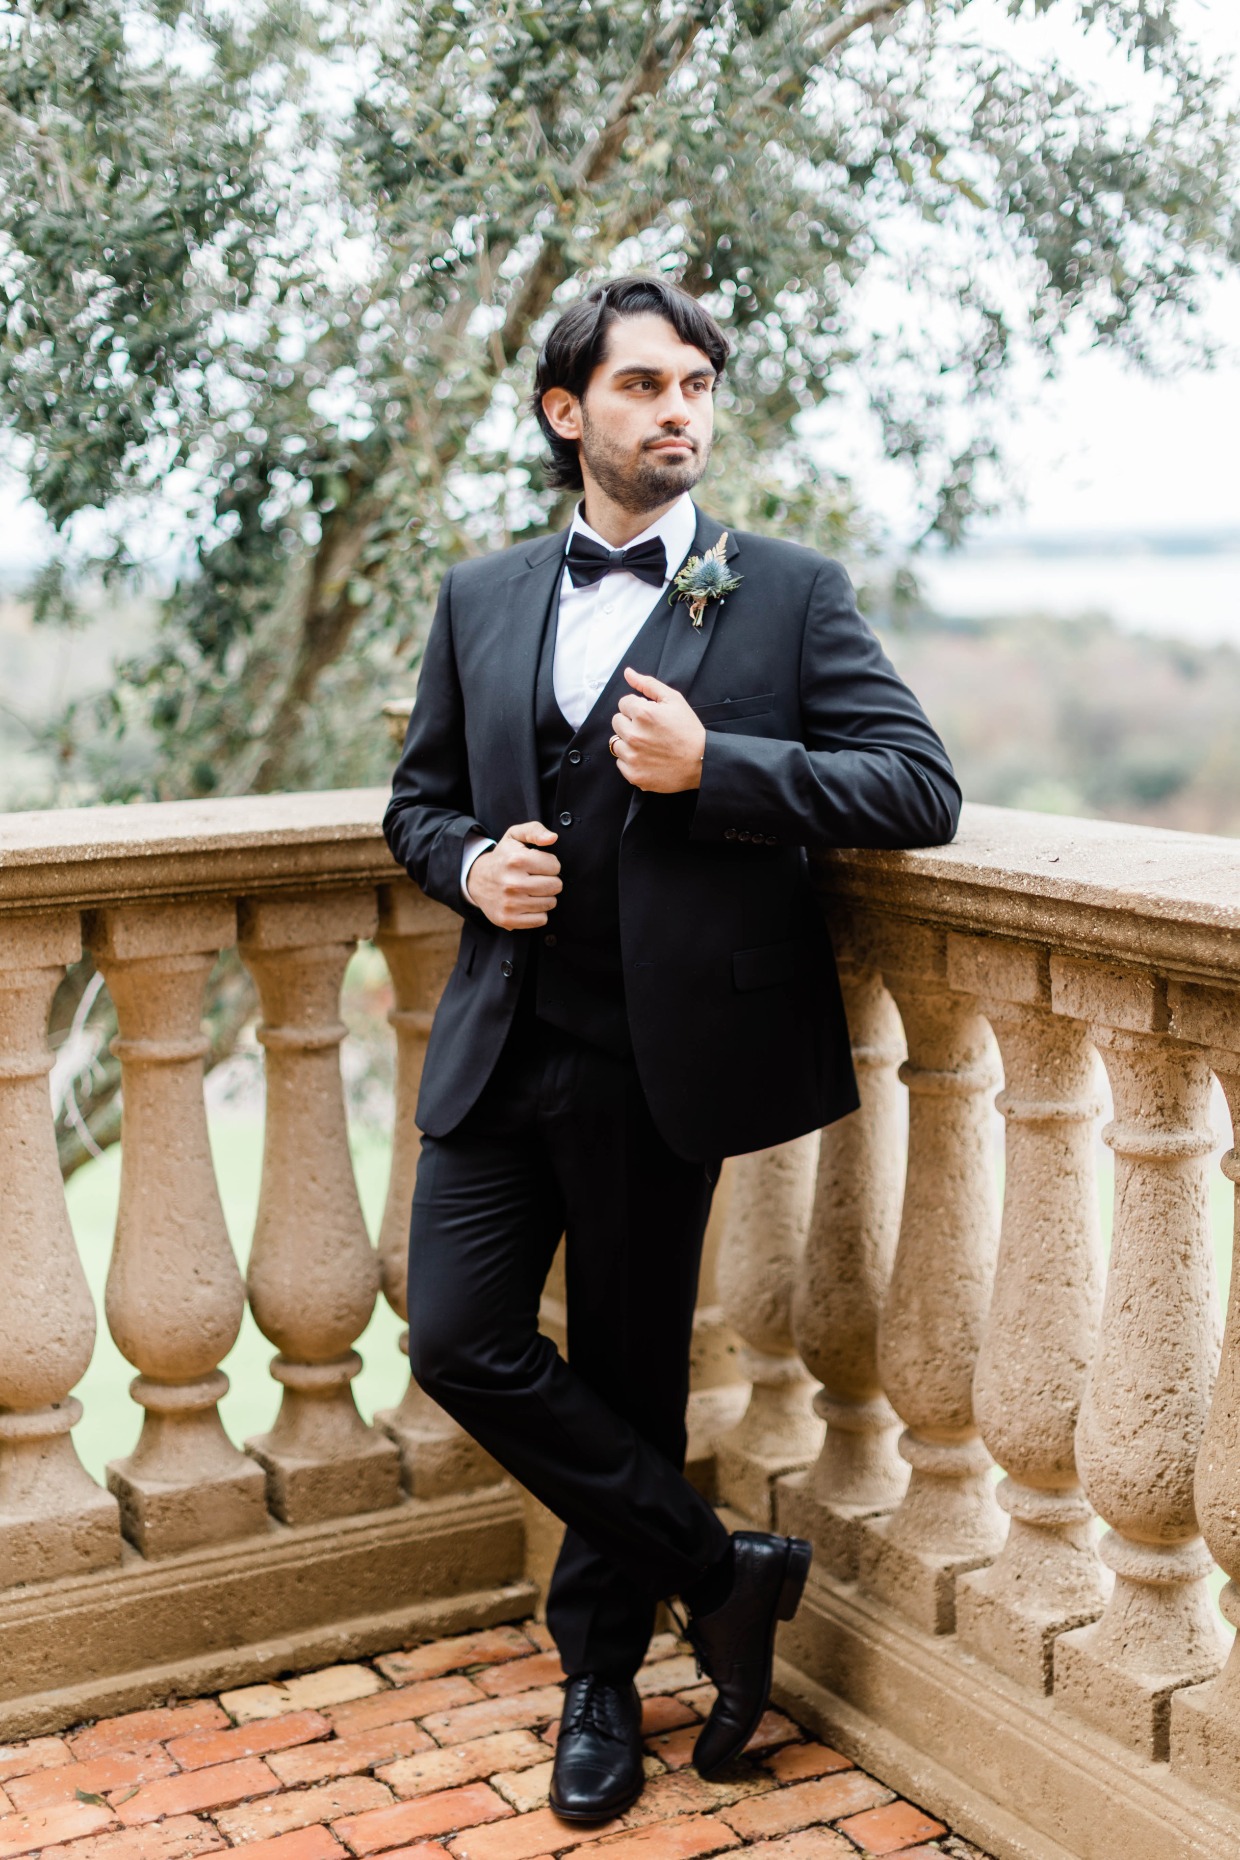 The Modern Groom Affordable Groom Looks shipped right to your door